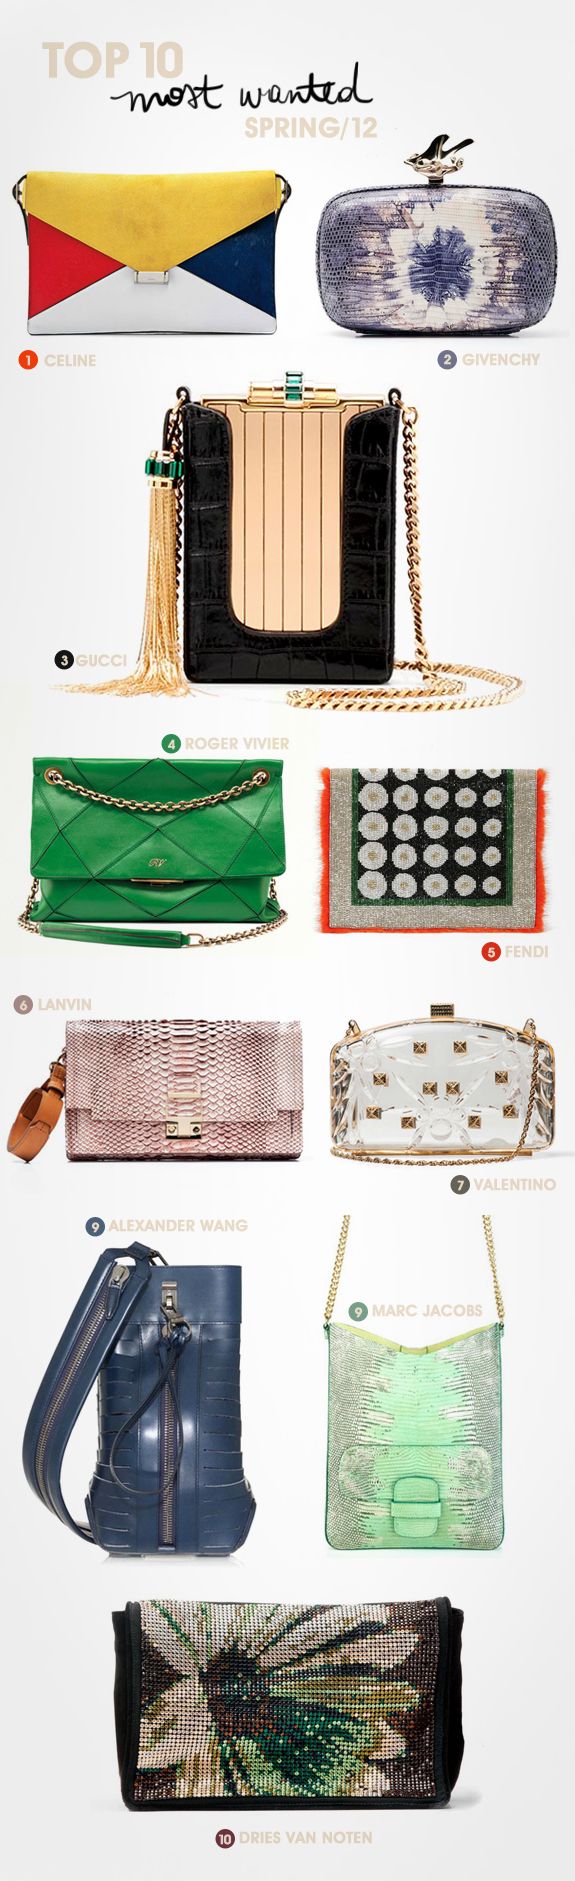 Most wanted bags for Spring 2012